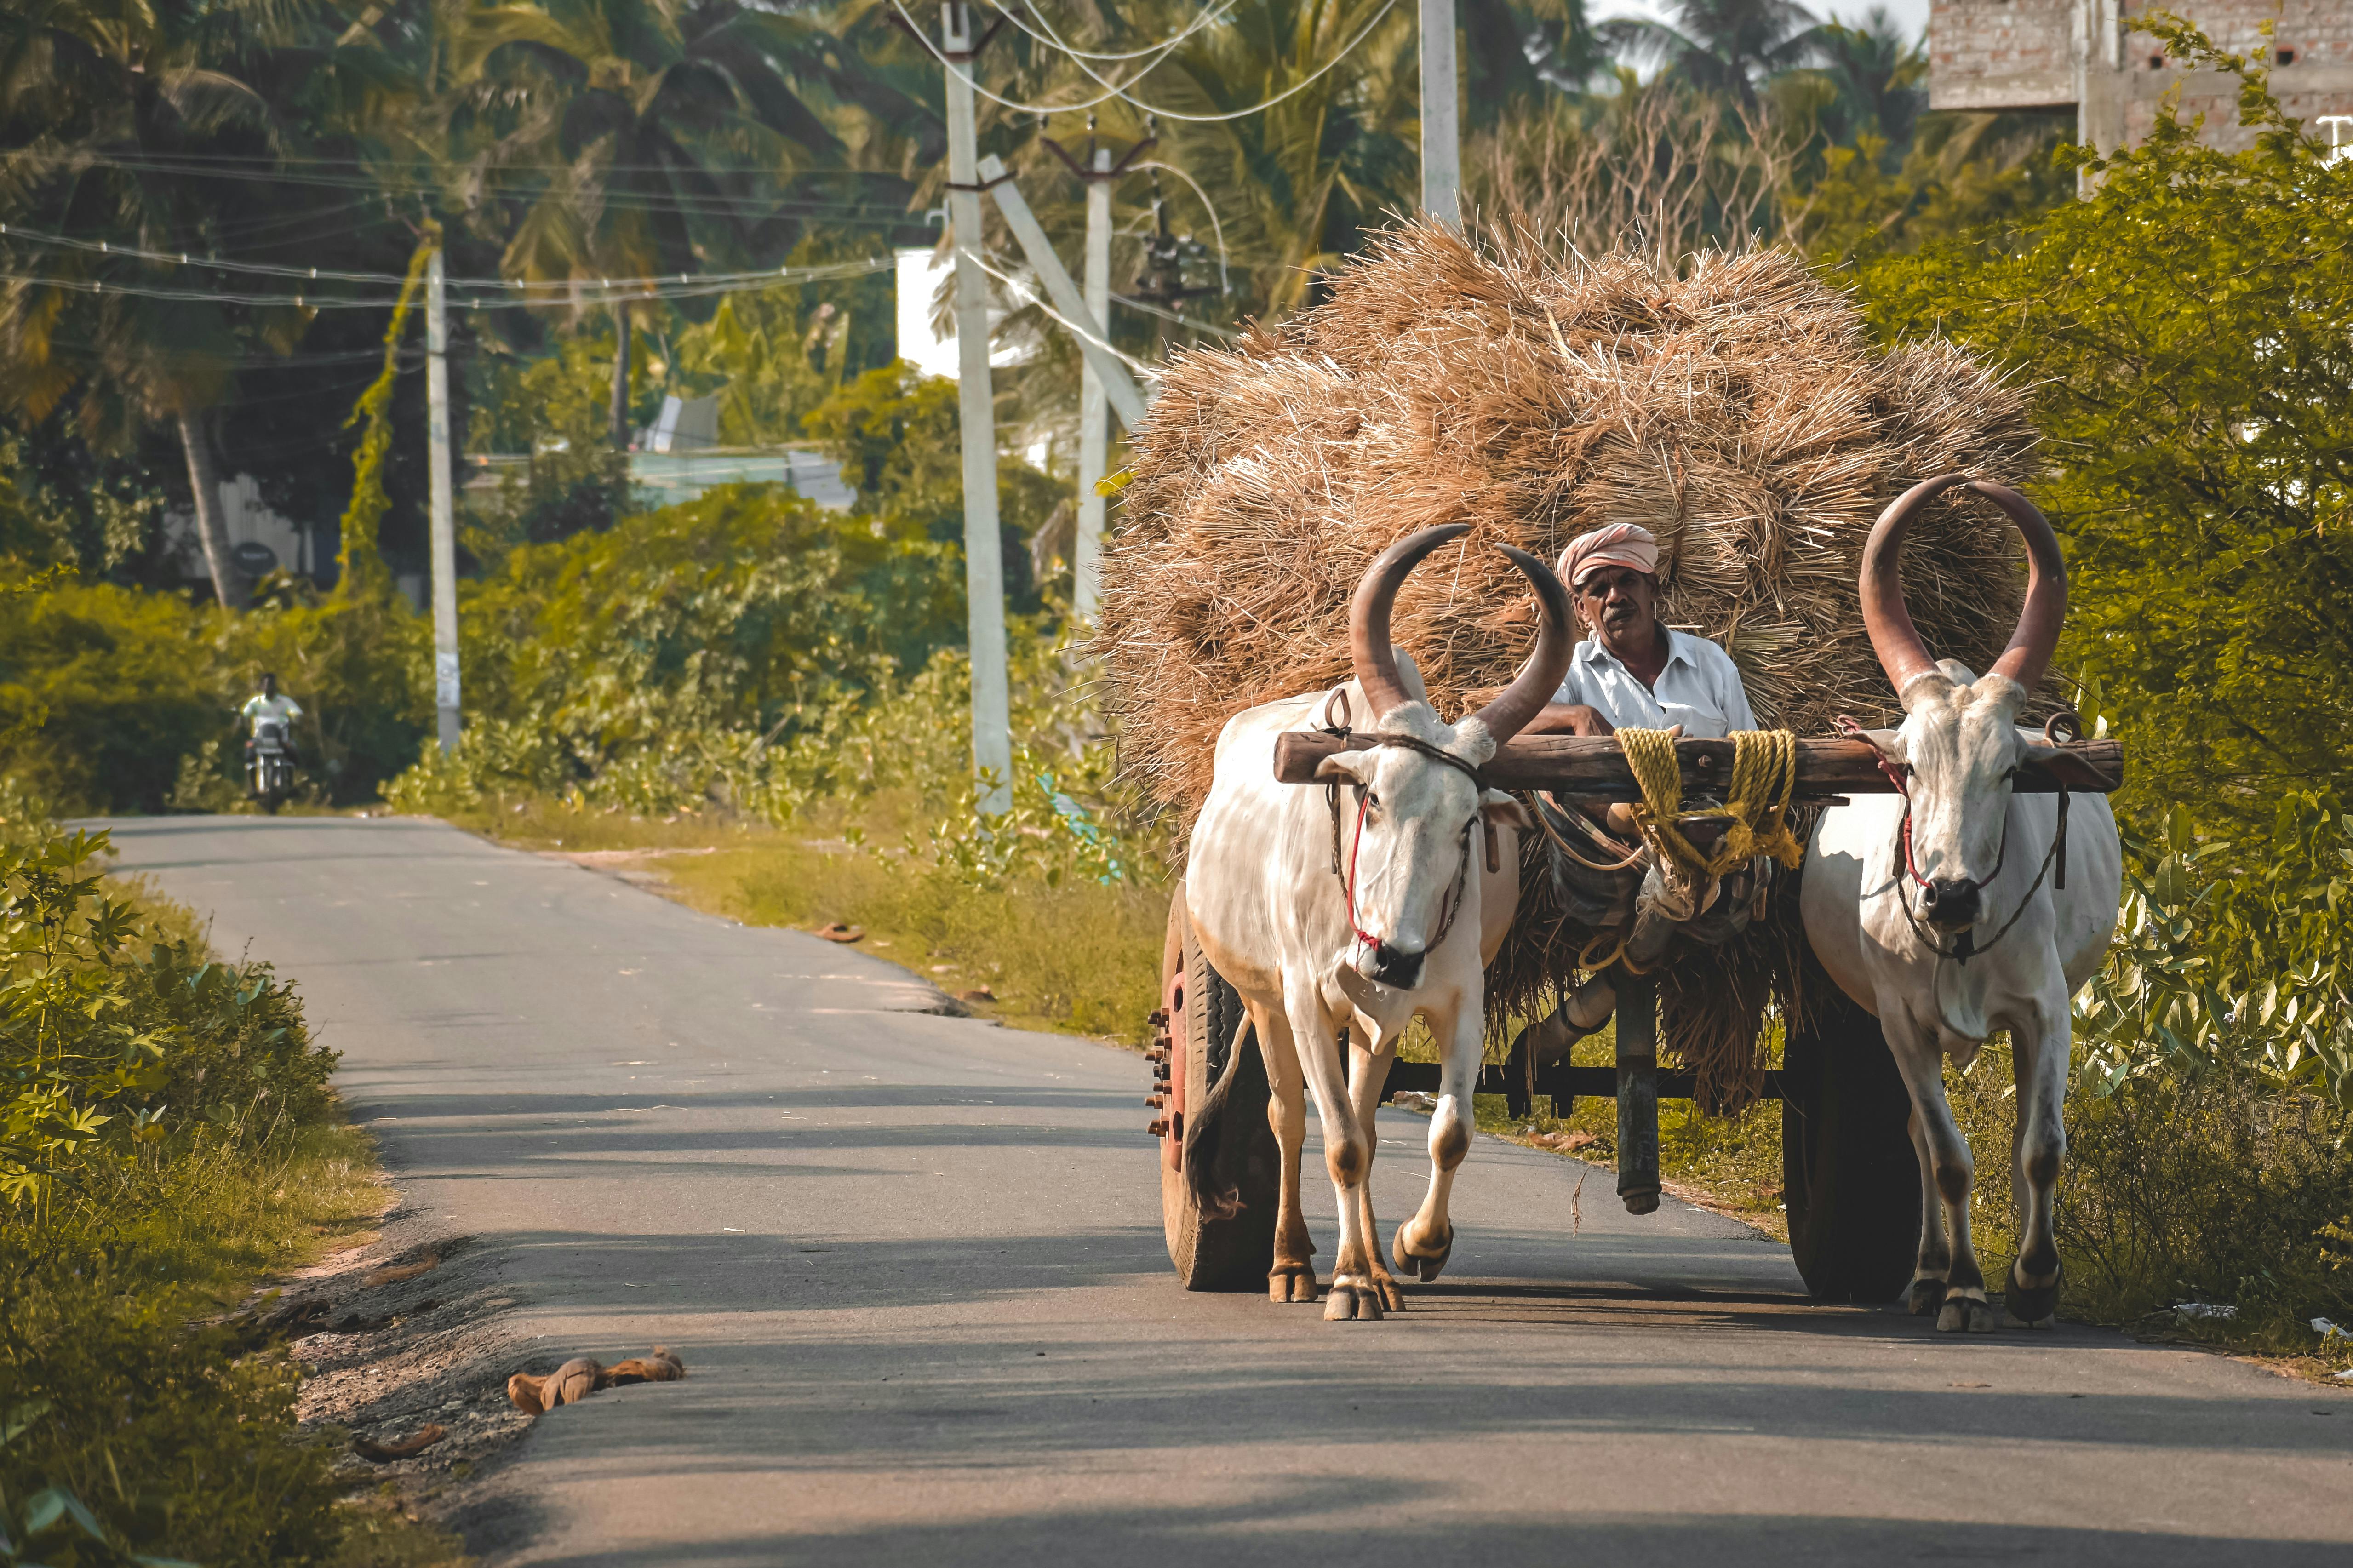 Man Riding a Bullock Cart Pulled by Animals · Free Stock Photo